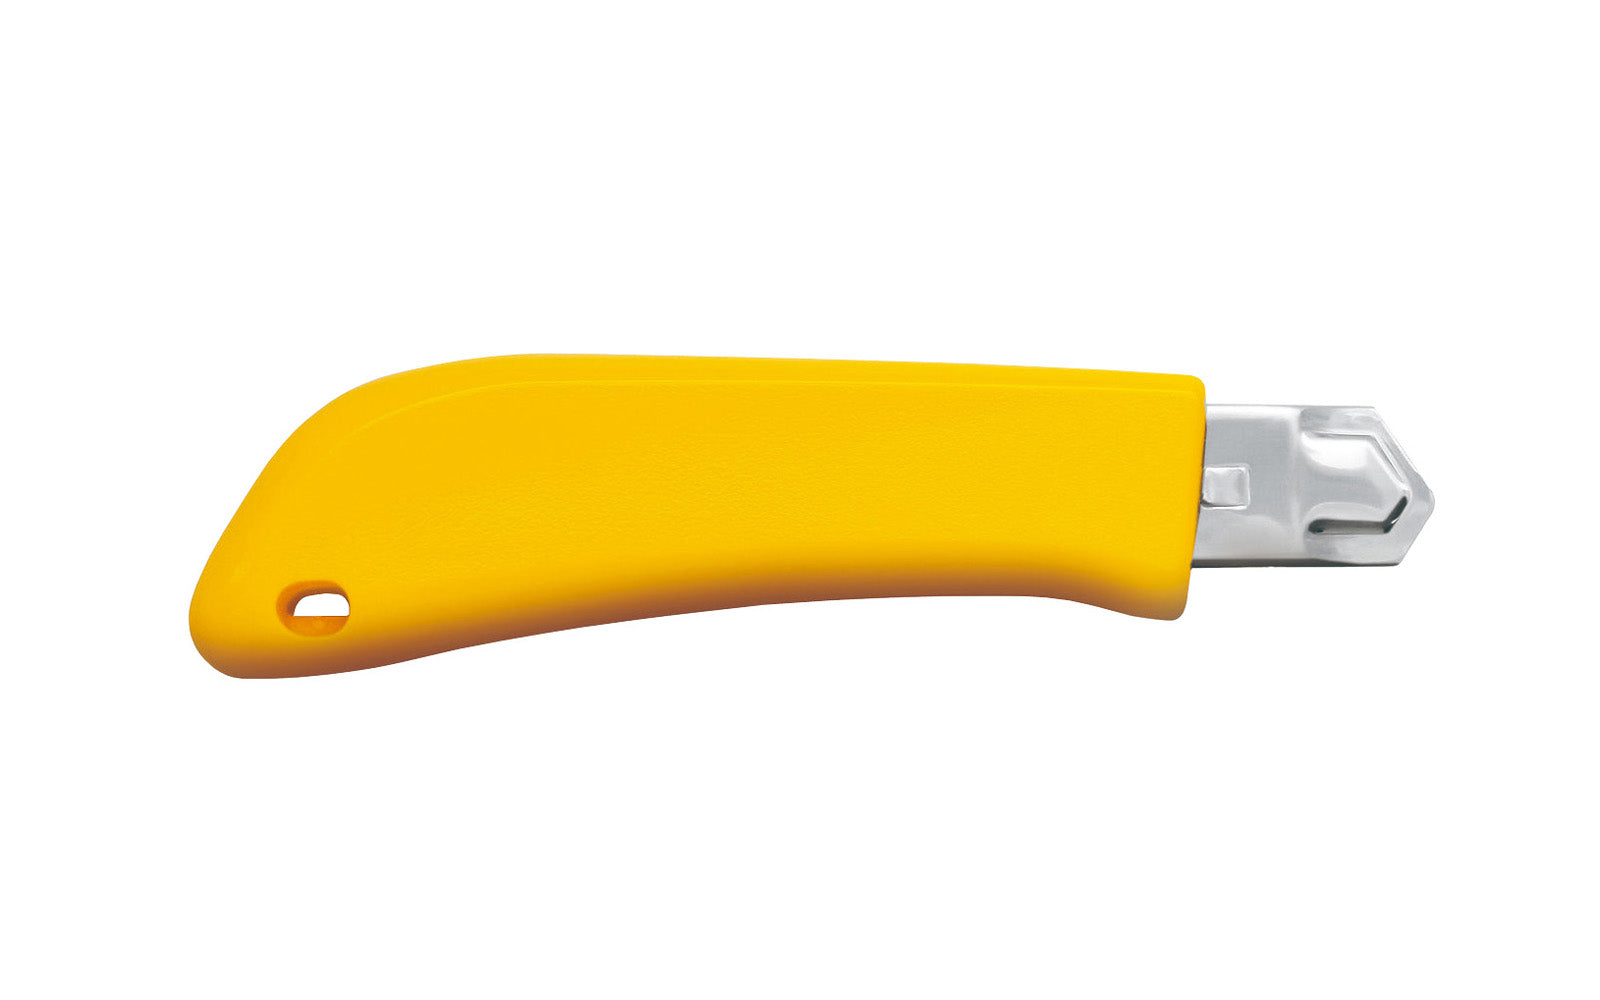 This OLFA "BN-AL" Utility Knife with 18 mm Blade is an auto-lock basic utility knife for heavy-duty cutting. Knife features a sturdy ABS plastic handle with a channel of stainless steel to support the snap blade. 091511100334. Olfa Model BN-AL. 18 mm (3/4") wide blade. Heavy Duty snap-off knife. Made in Japan